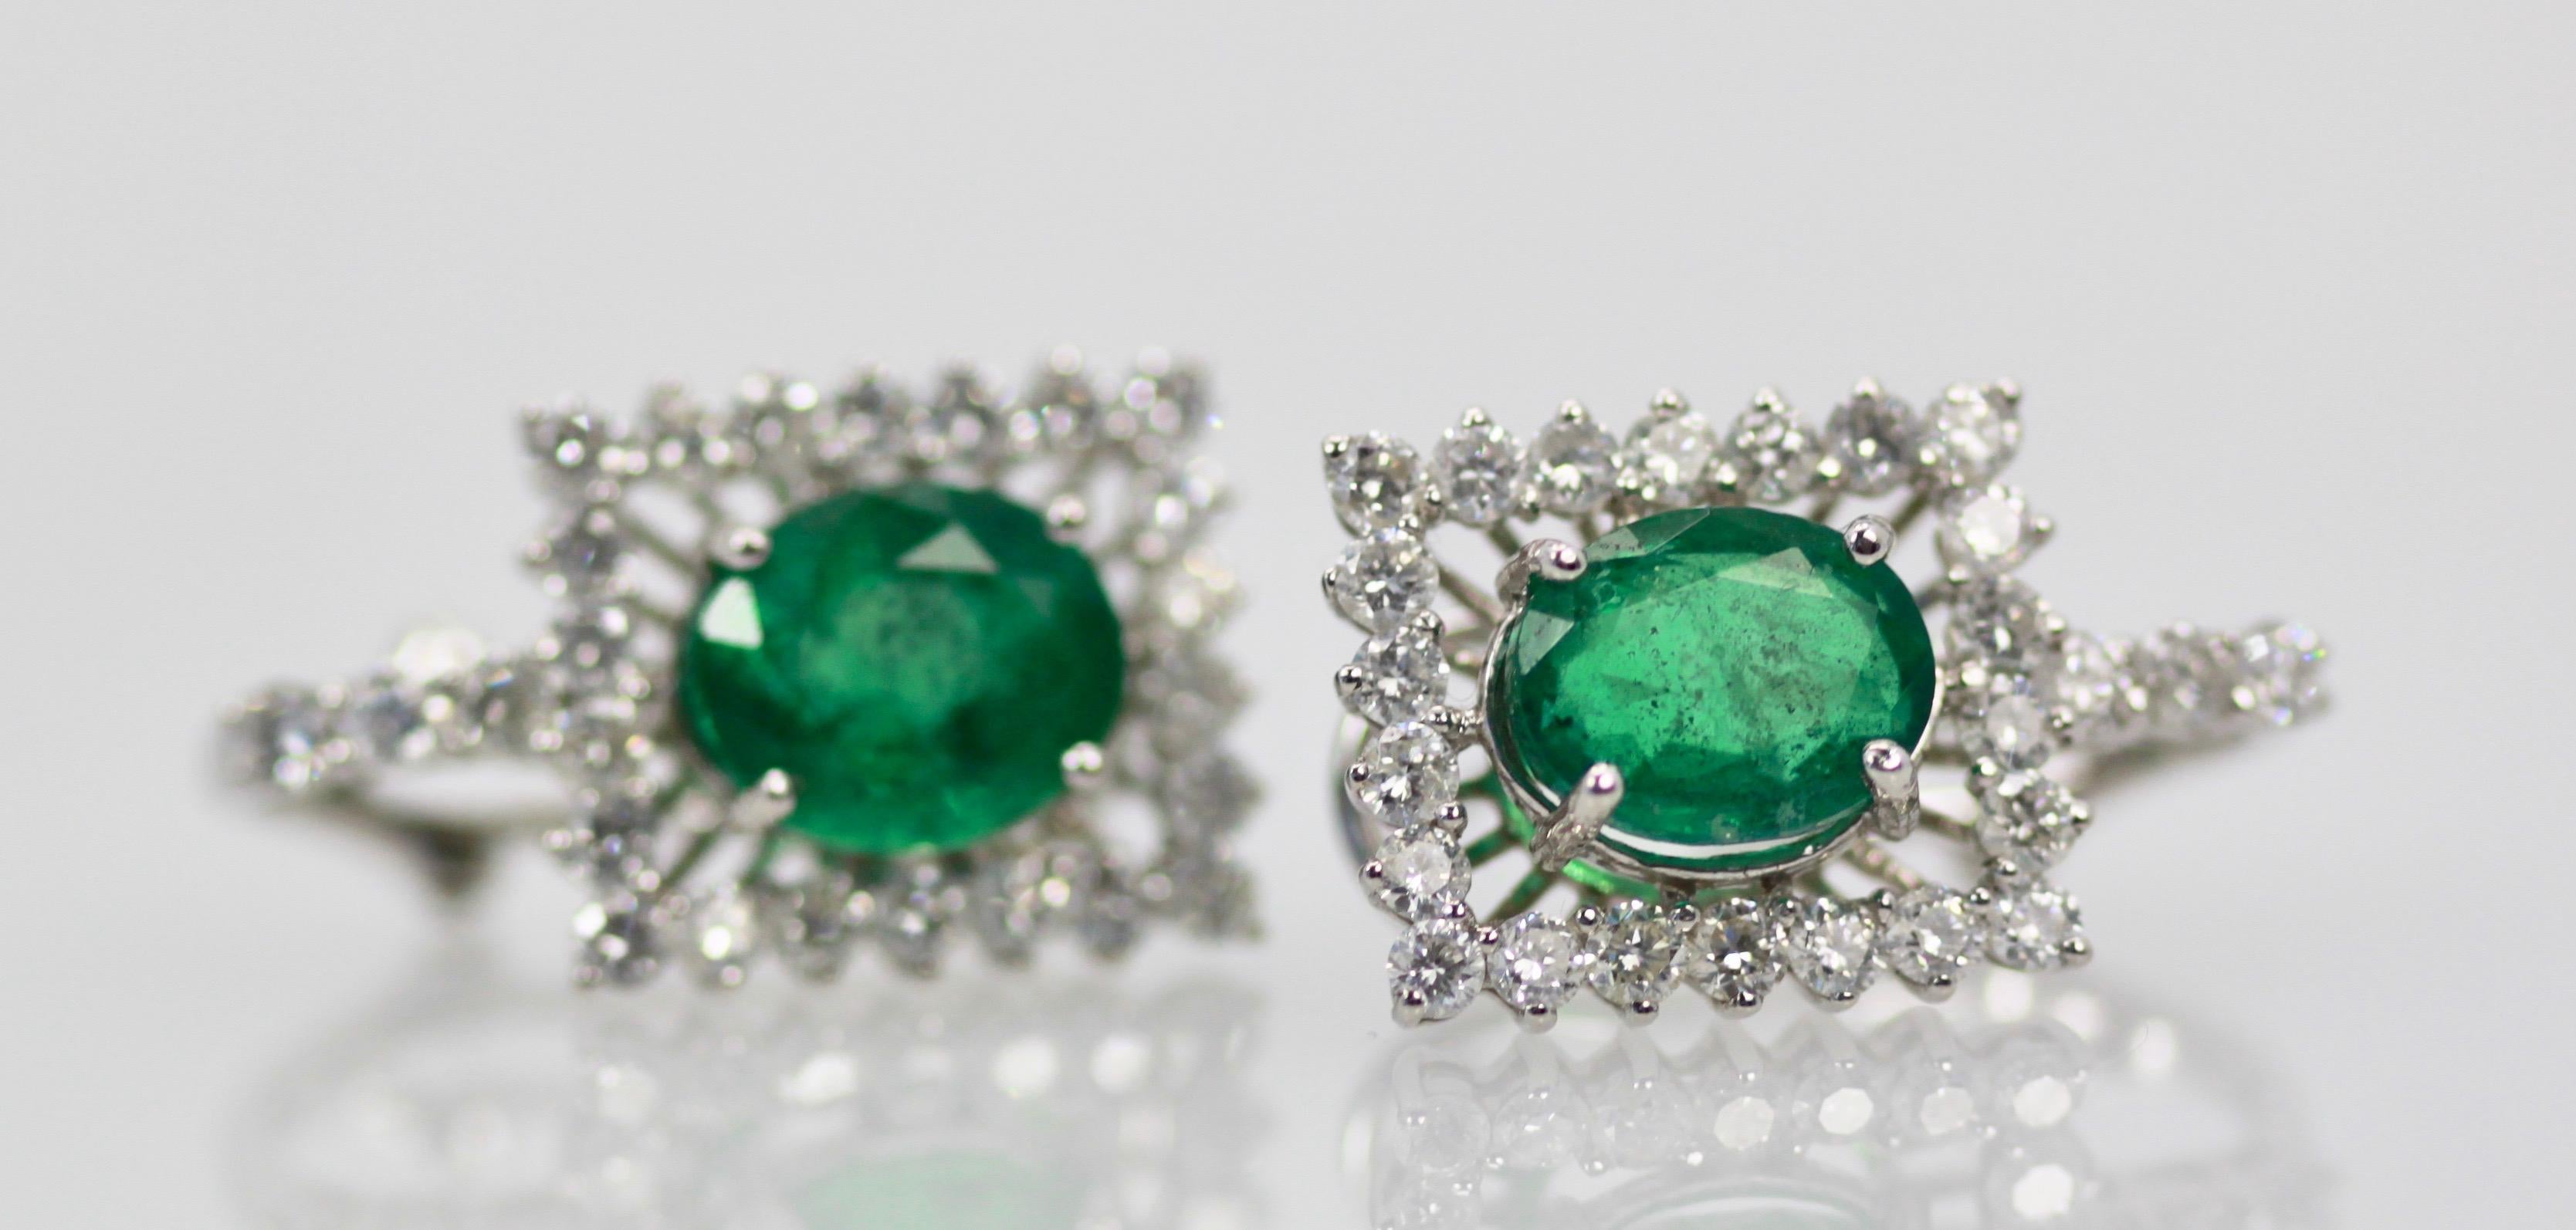 These gorgeous handmade earrings features two genuine earth mined untreated oval cut emeralds of approximately 5.83 carats. These emeralds has a lovely color of green and unaided by magnification is clean and transparent to the naked eye.